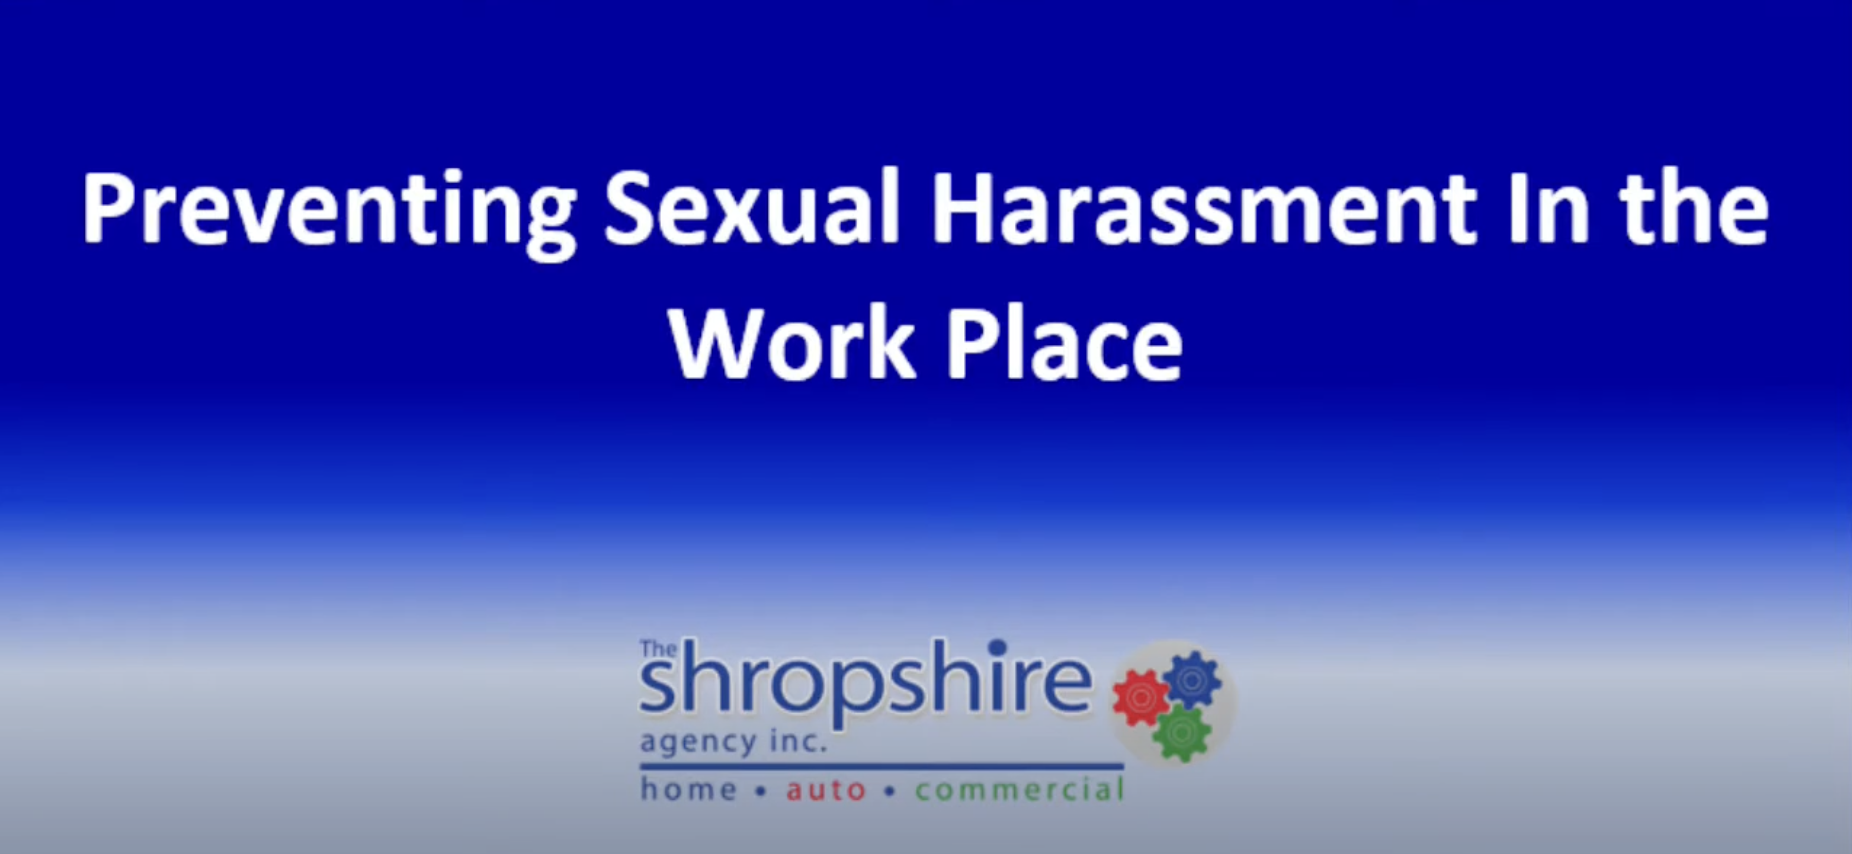 3 TIPS FOR PREVENTING SEXUAL HARASSMENT AT THE WORK PLACE